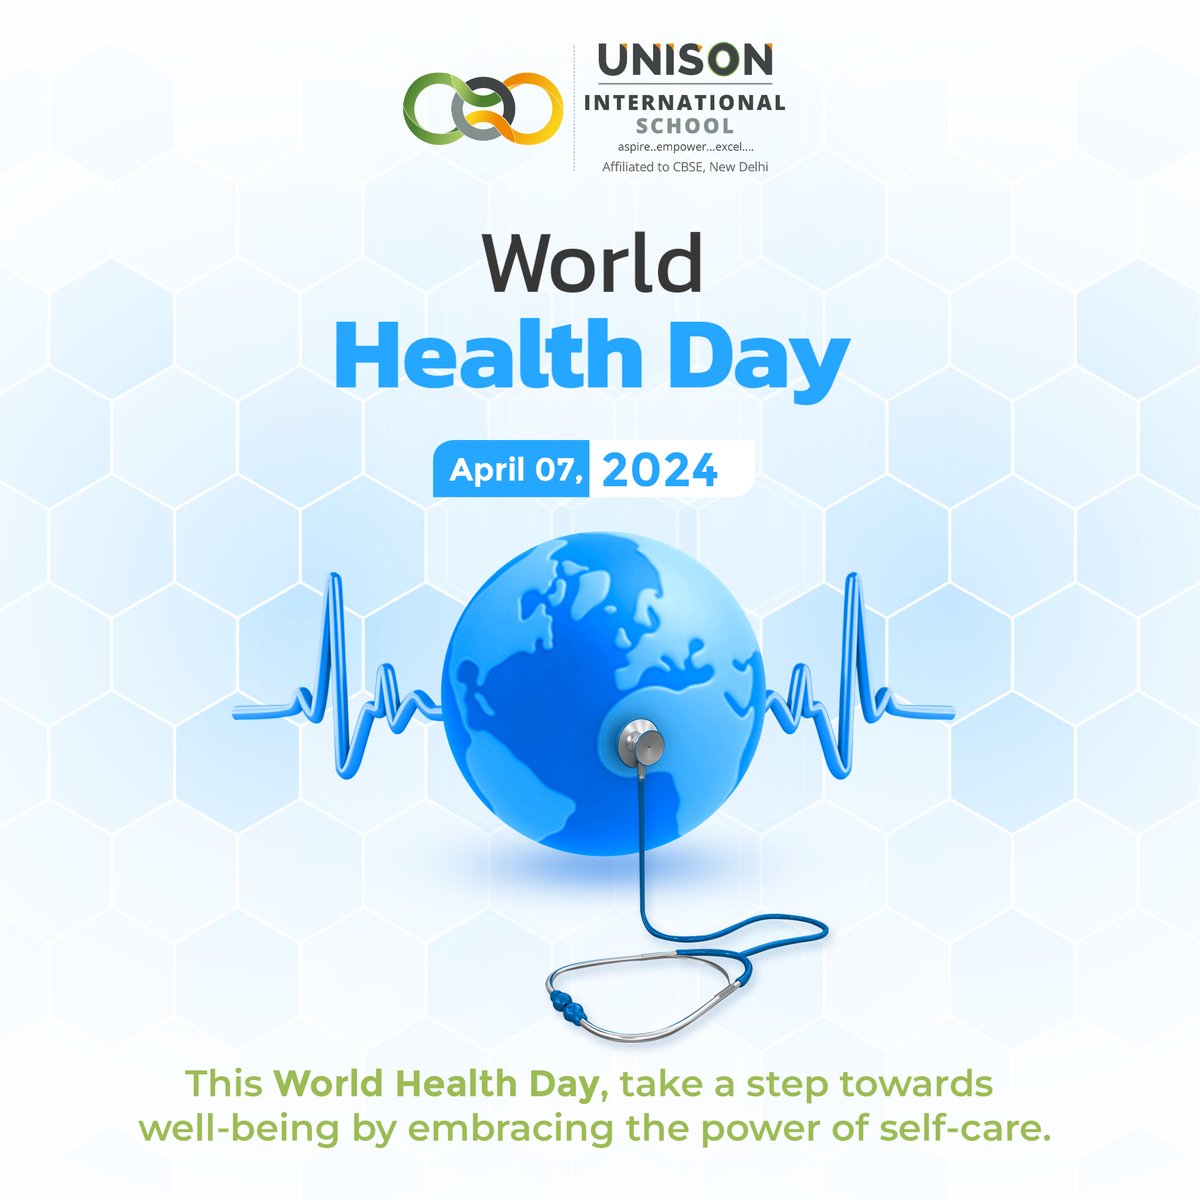 World Health Day is a timely reminder to prioritise mental and physical well-being. Let's pledge to make health a top priority in our lives and communities✨⛹️

#WorldHealthDay #UnisonInternationalSchool #Excellence #Academics #ExtracurricularActivities #FutureLeaders